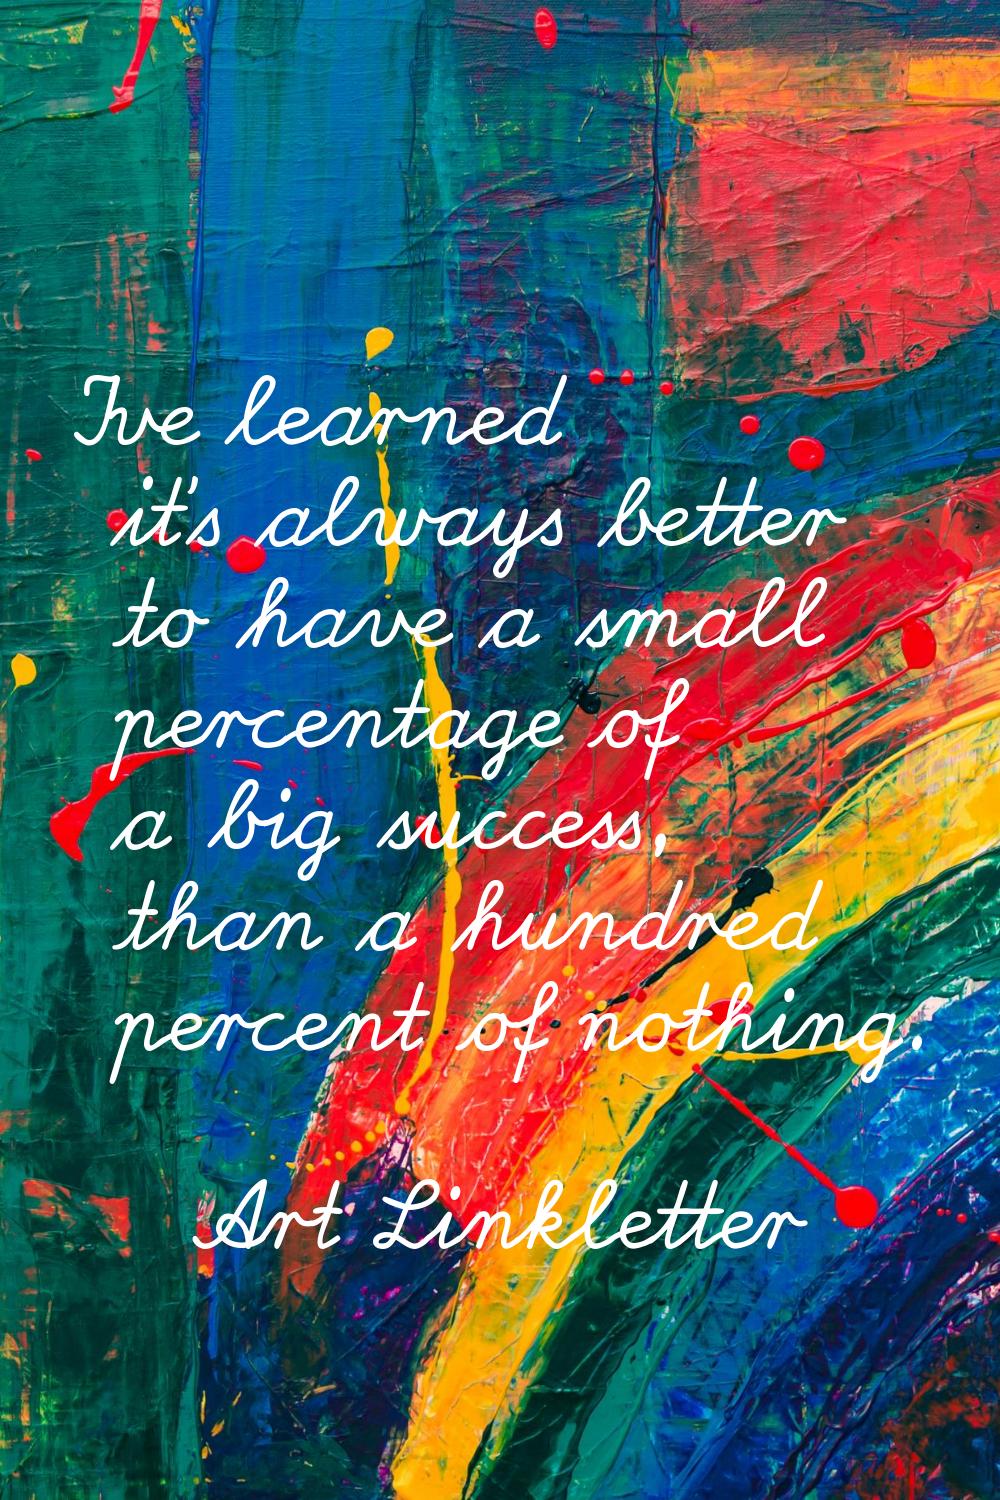 I've learned it's always better to have a small percentage of a big success, than a hundred percent